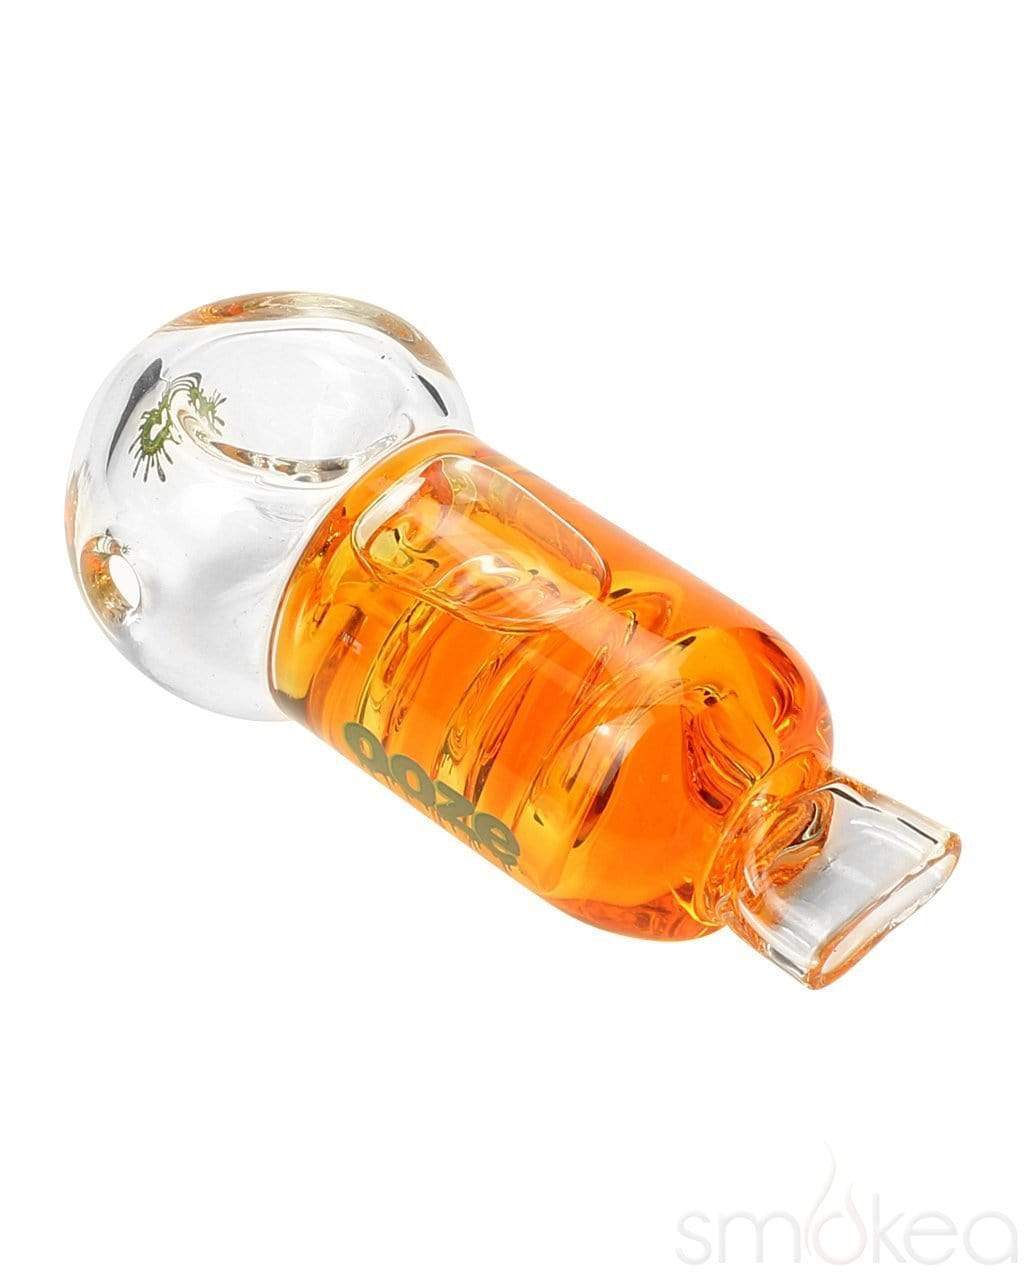 Freeze Pipe - Glass Weed Pipe Featuring a Freezable Glycerin Coil